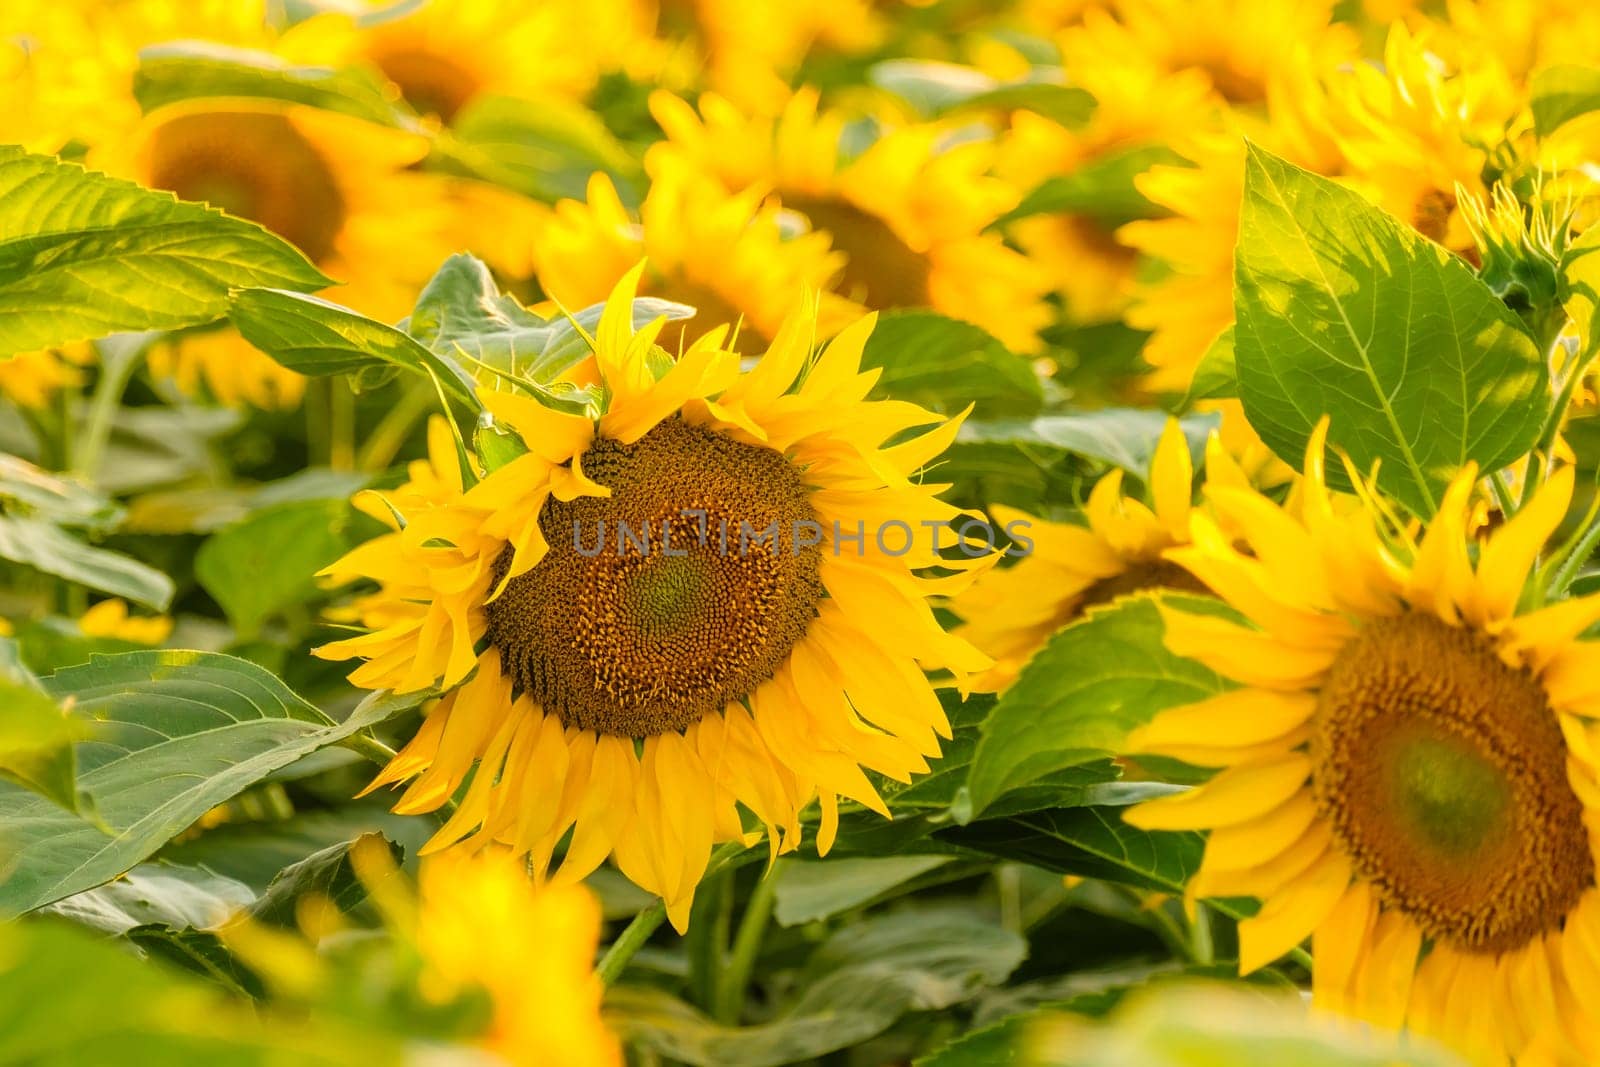 Blooming sunflowers with bright yellow petals and green leaves grow in field. Agriculture in countryside on sunny summer day close view